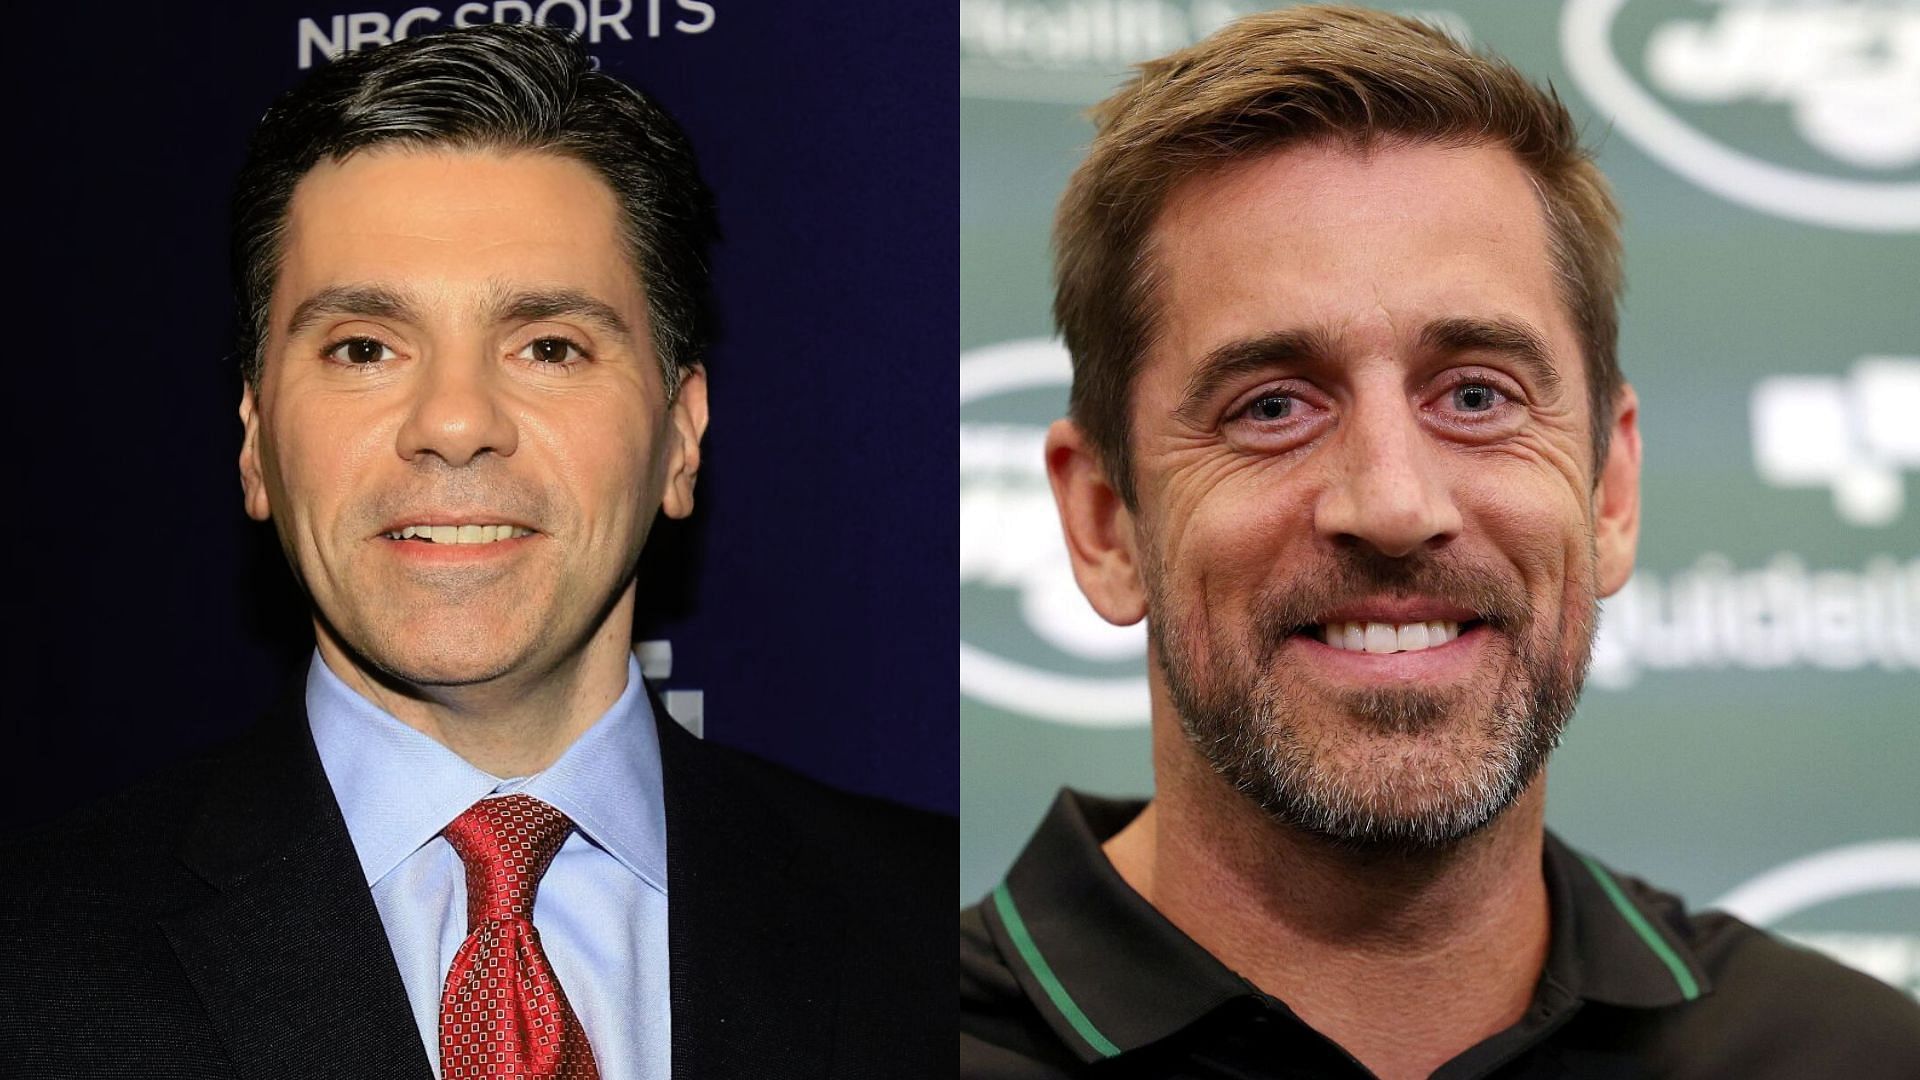 Pro Football Talk host Mike Florio is cautious about Aaron Rodgers